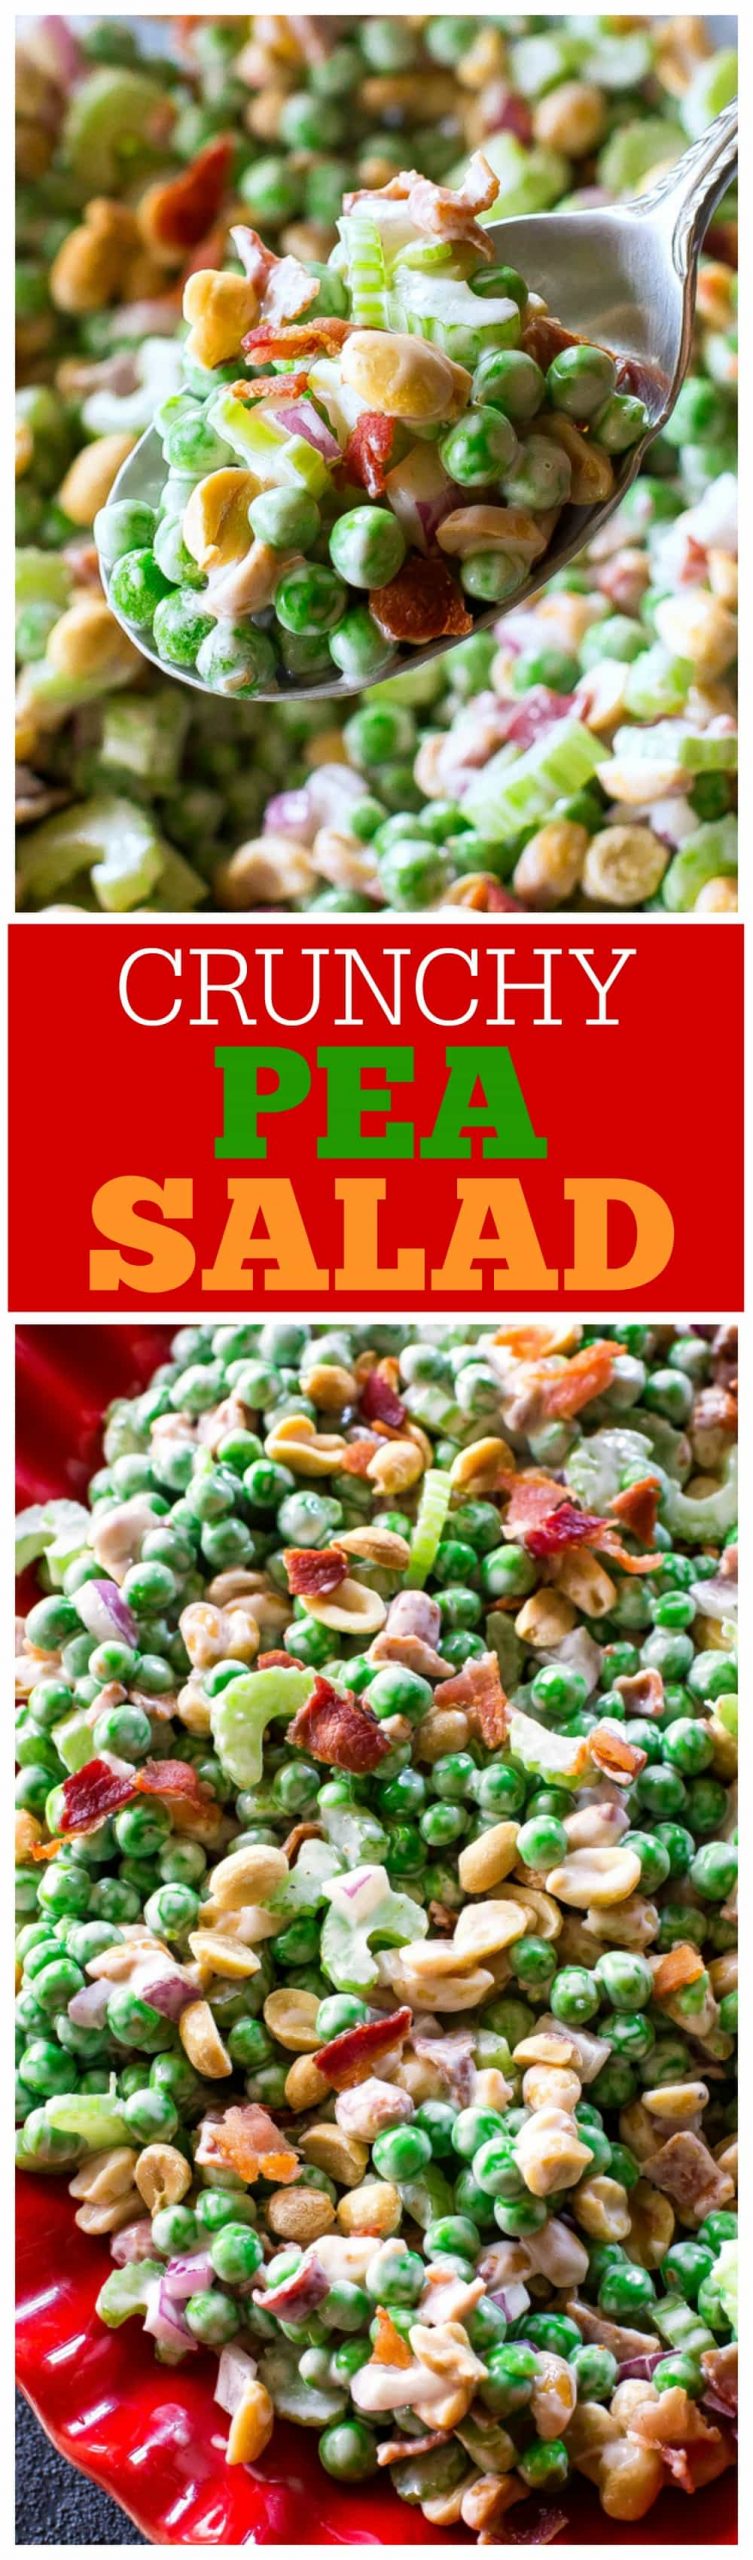 This Crunchy Pea Salad may sound weird but trust me, it's so good! Peas, peanuts, bacon, celery...all for a refreshing salad. This recipe is a potluck favorite! #crunchy #pea #salad #side #easter #potluck #bbq